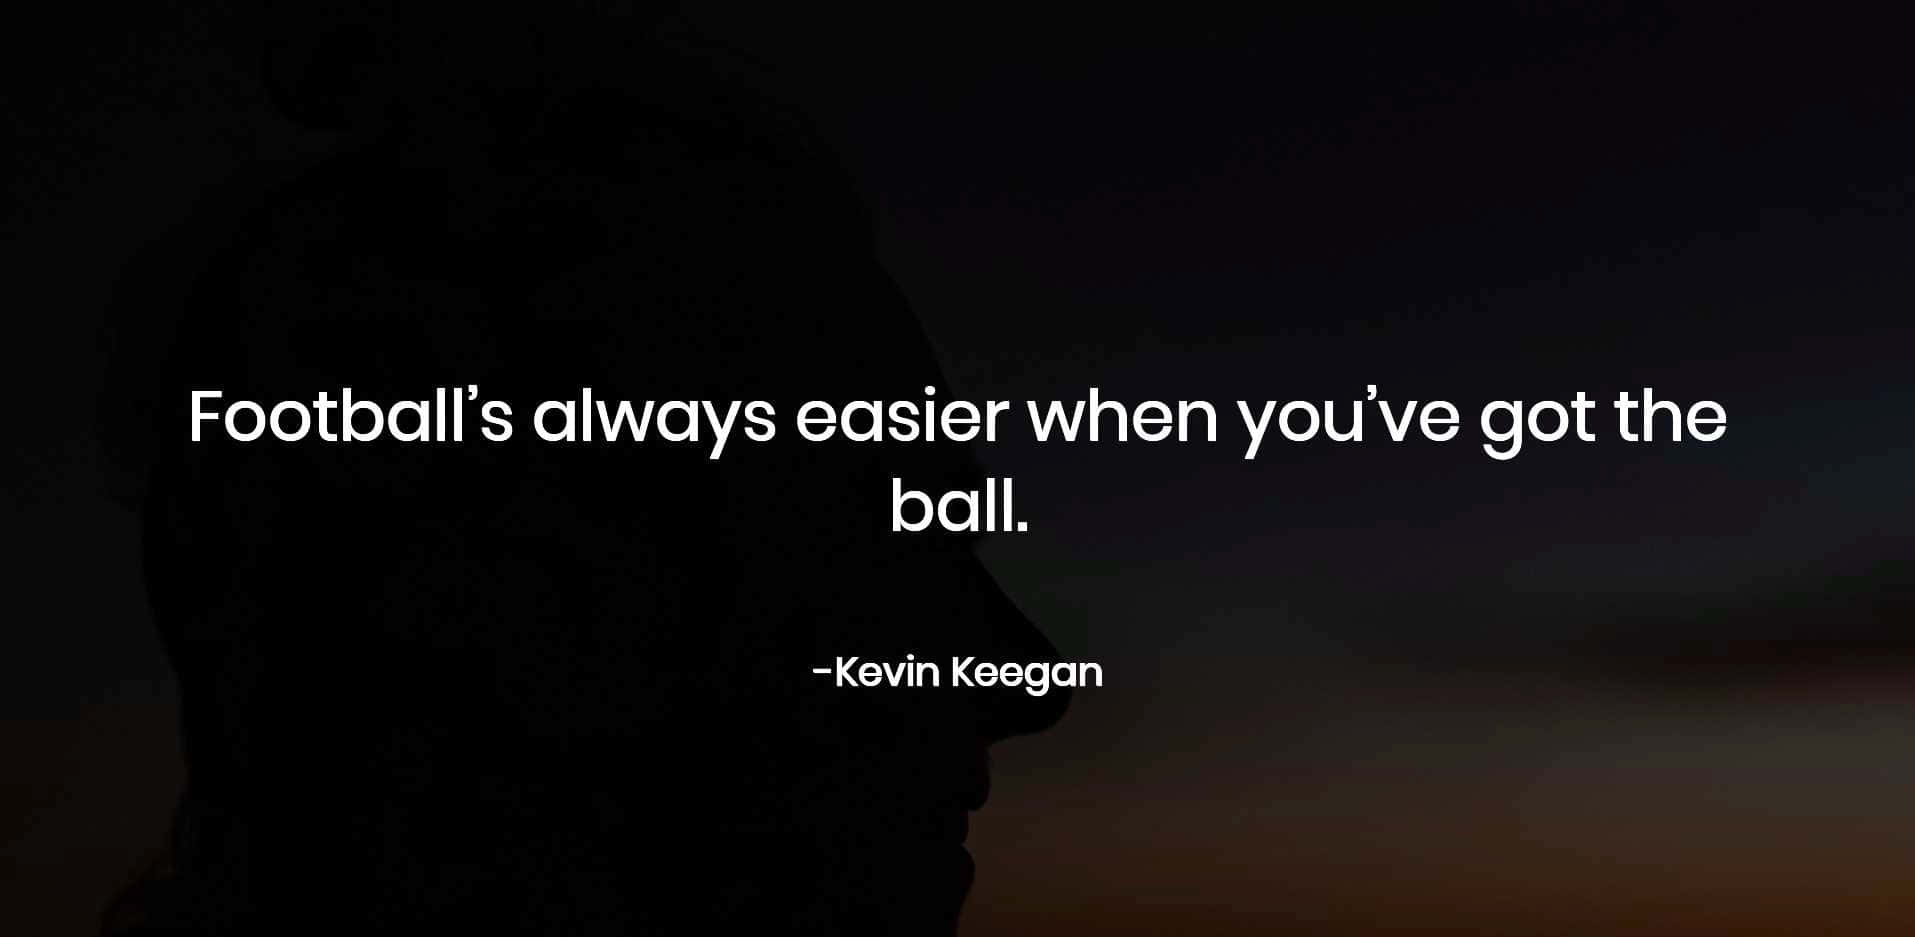 Former Football Player Kevin Keegan Quote Wallpaper